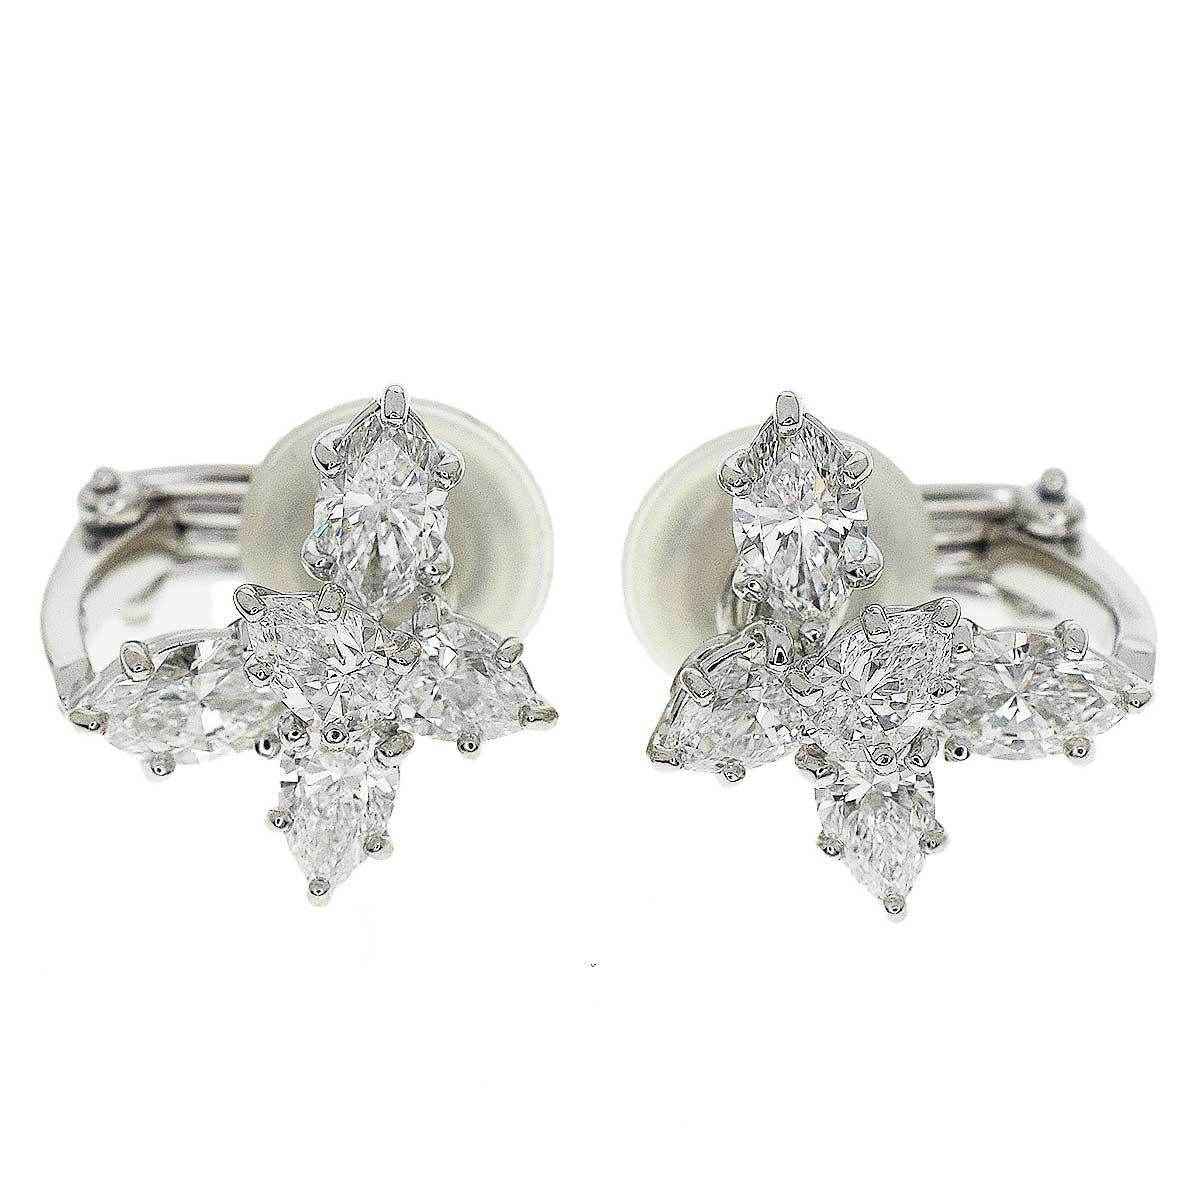 Brand:HARRY WINSTON
Reference price:JPY4,488,000YEN(included tax)
Name:Winston Cluster by Harry Winston, Small Diamond Earrings
Material:4P marquis, 6P pear shape diamond (D2.58ct), Pt950 platinum
Comes with:Harry Winston Case, HW Repair Receipt